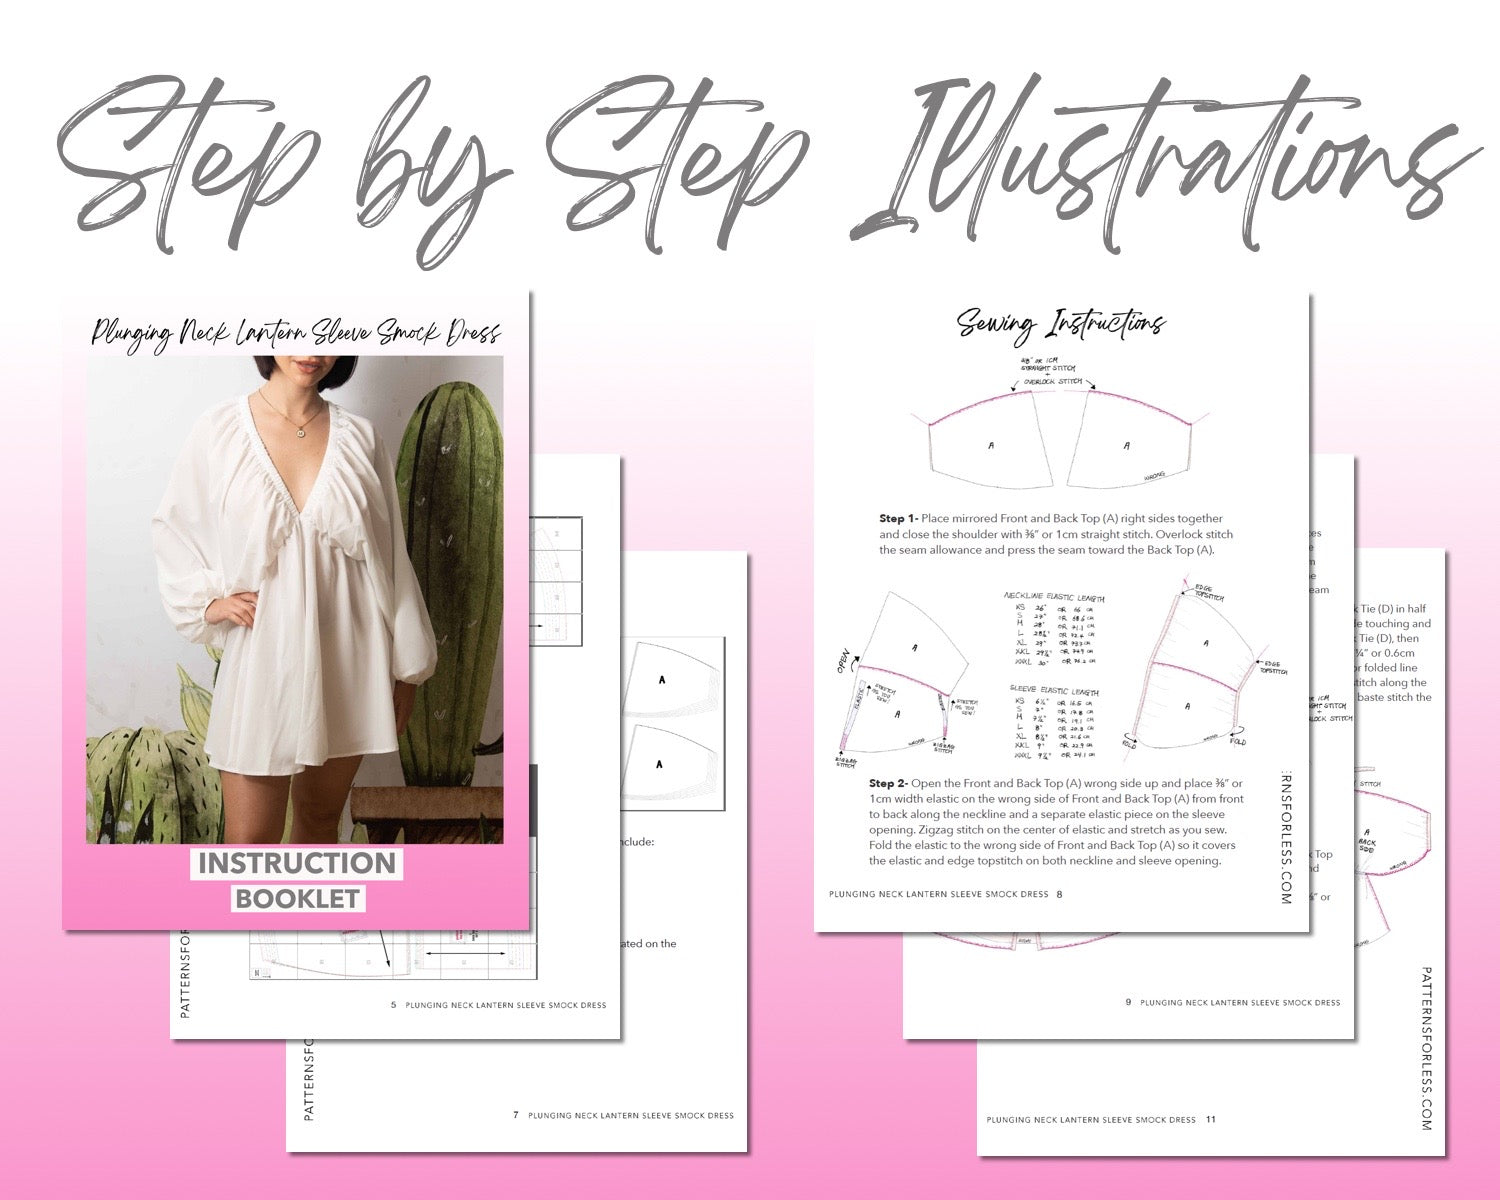 Plunging Neck Lantern Sleeve Smock Dress sewing pattern step by step illustrations.